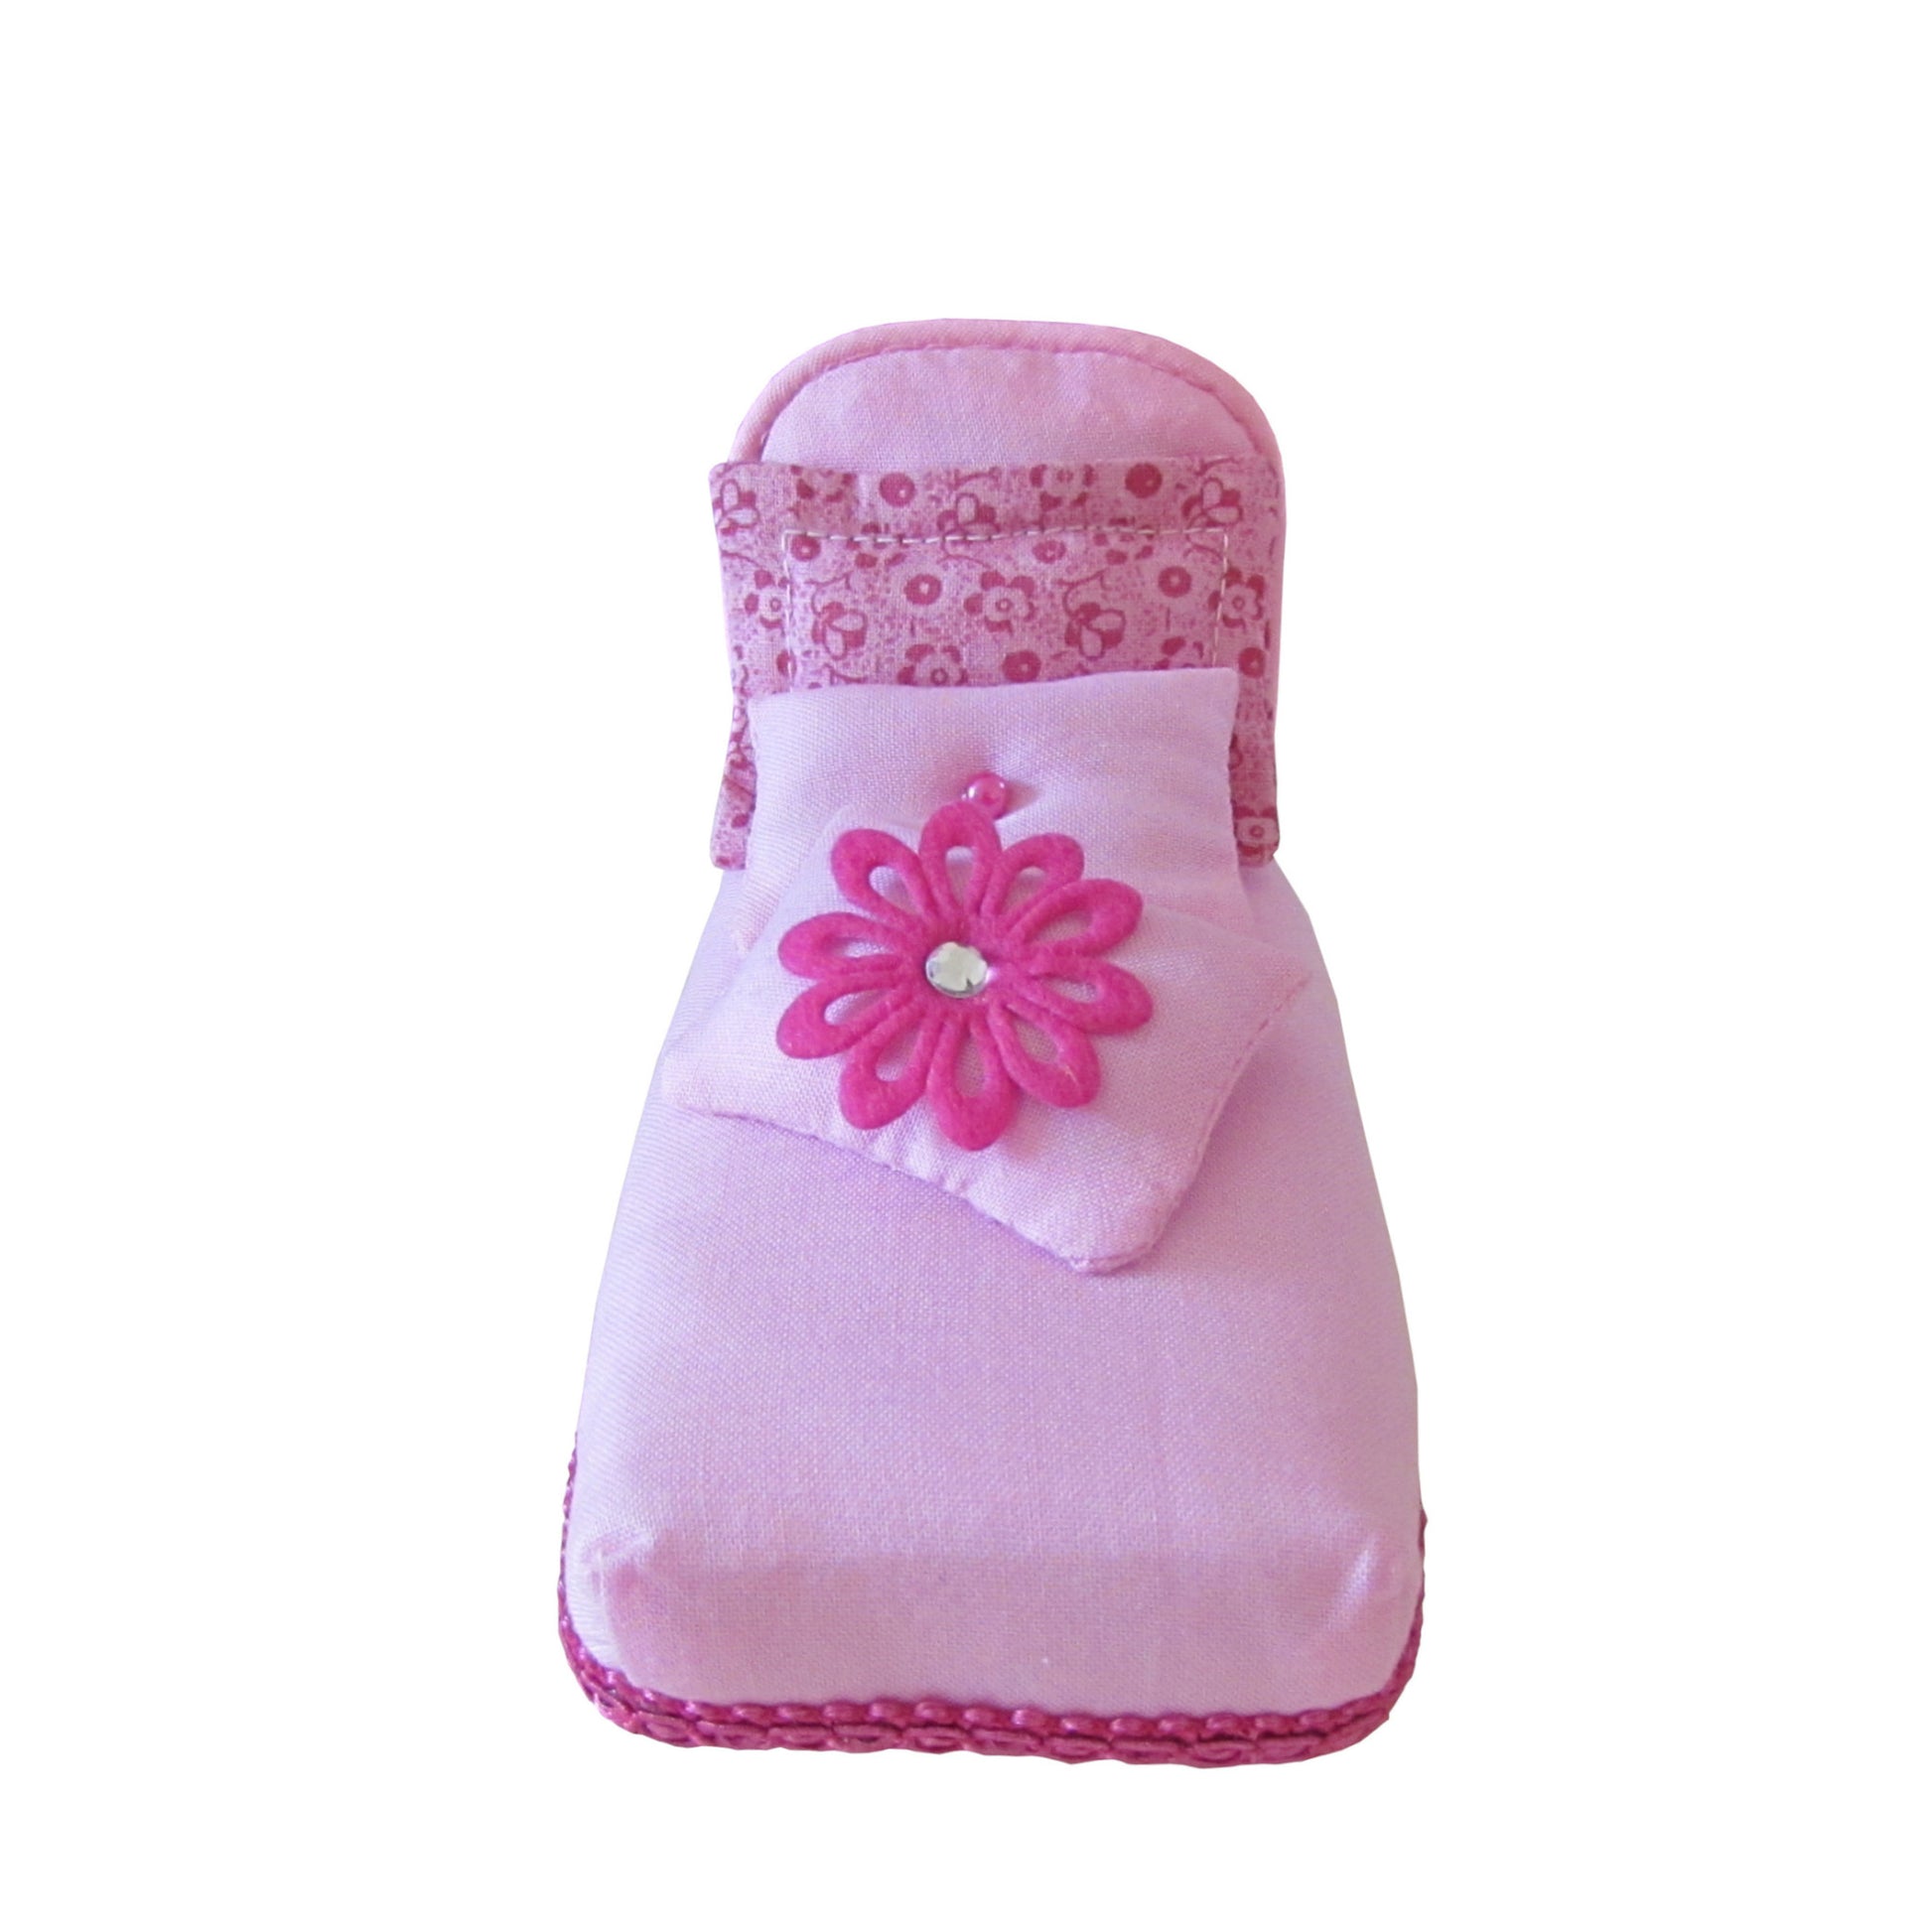 Pink Pincushion Bed with Floral Print Pillow Front view